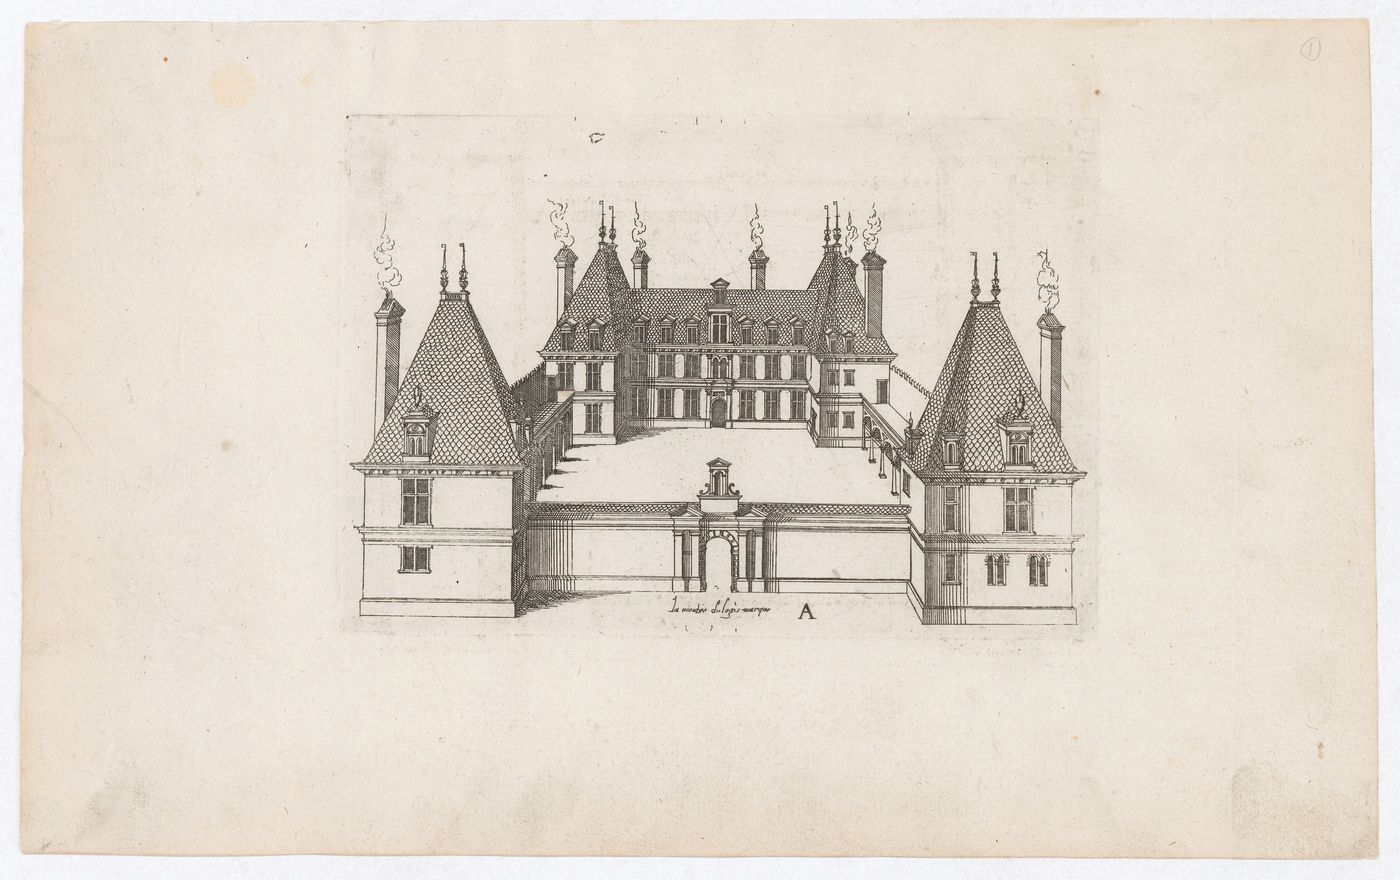 Bird's-eye perspective for château A with a forecourt bordered by two galleries and rectangular corner towers with pitched roofs